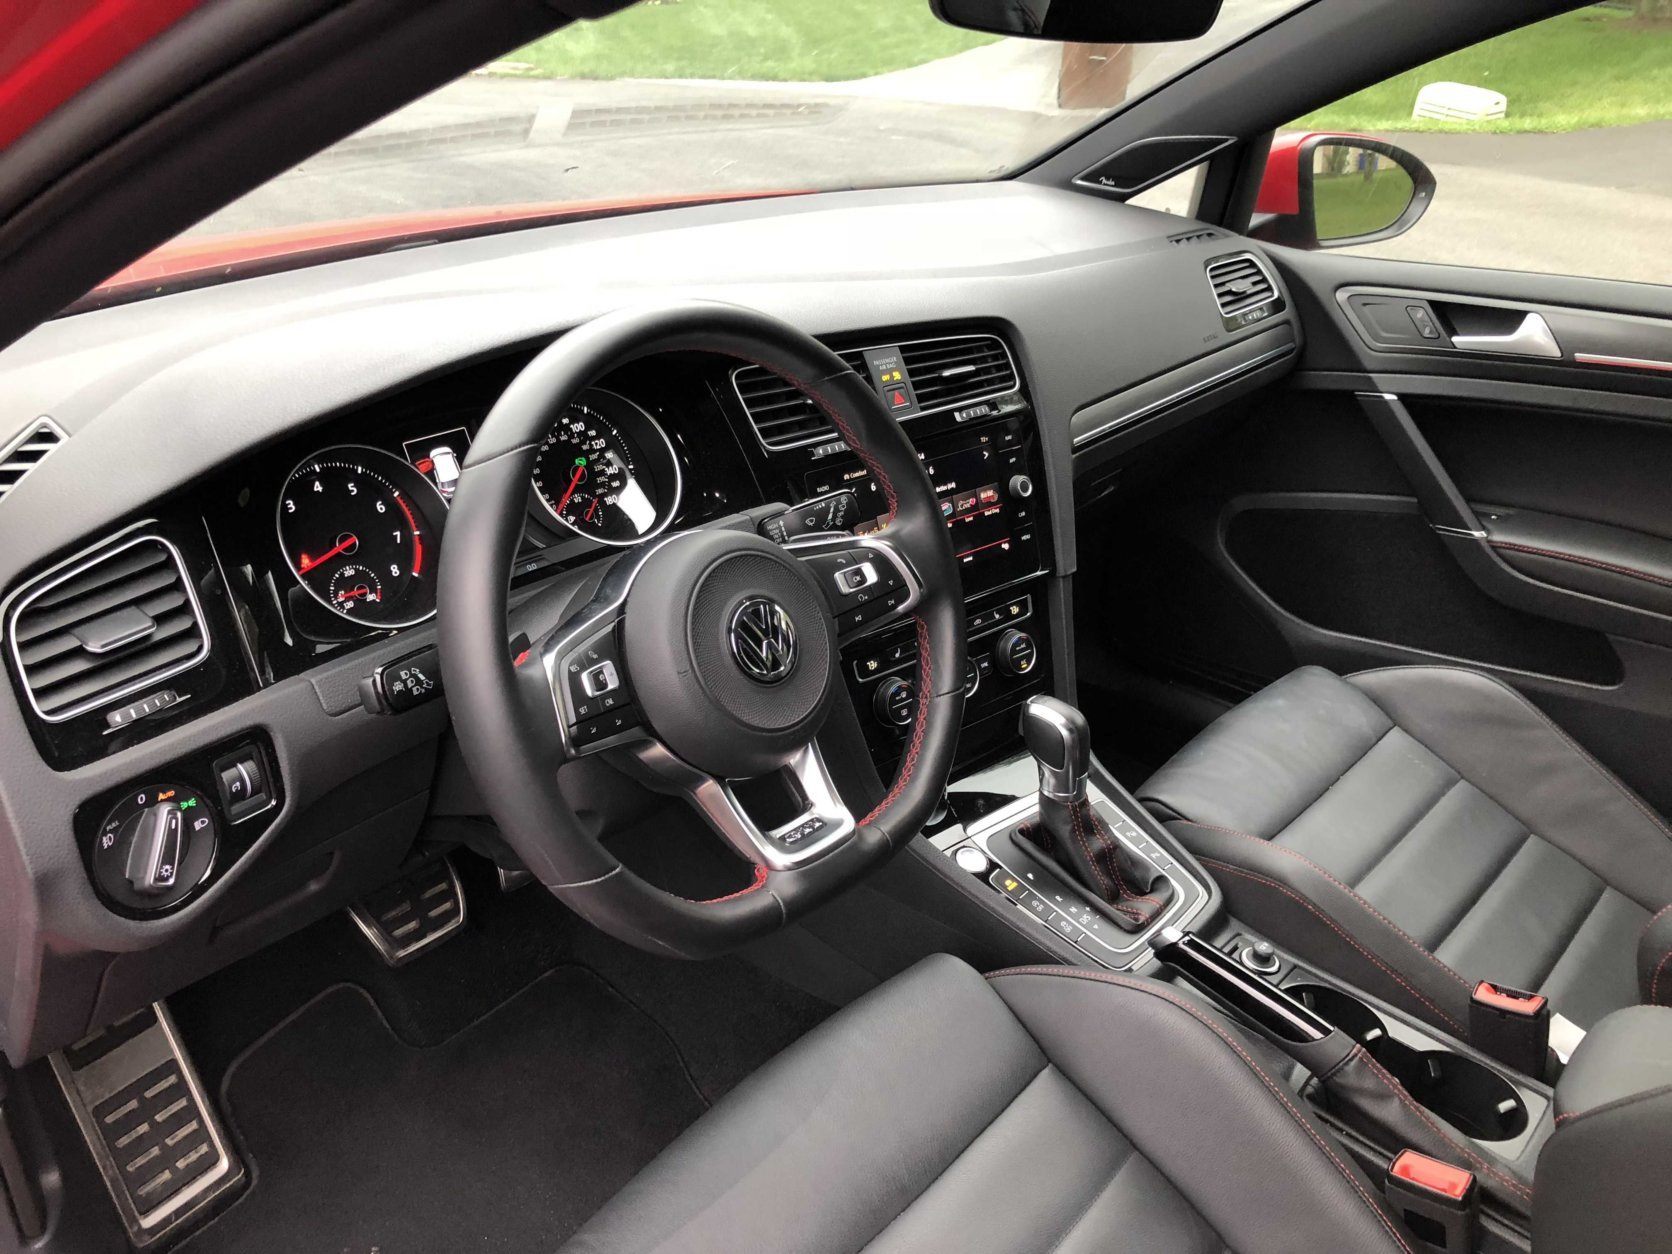 Red stitching on the steering wheel and seats add to the luxurious look of the GTI. (WTOP/Mike Parris)